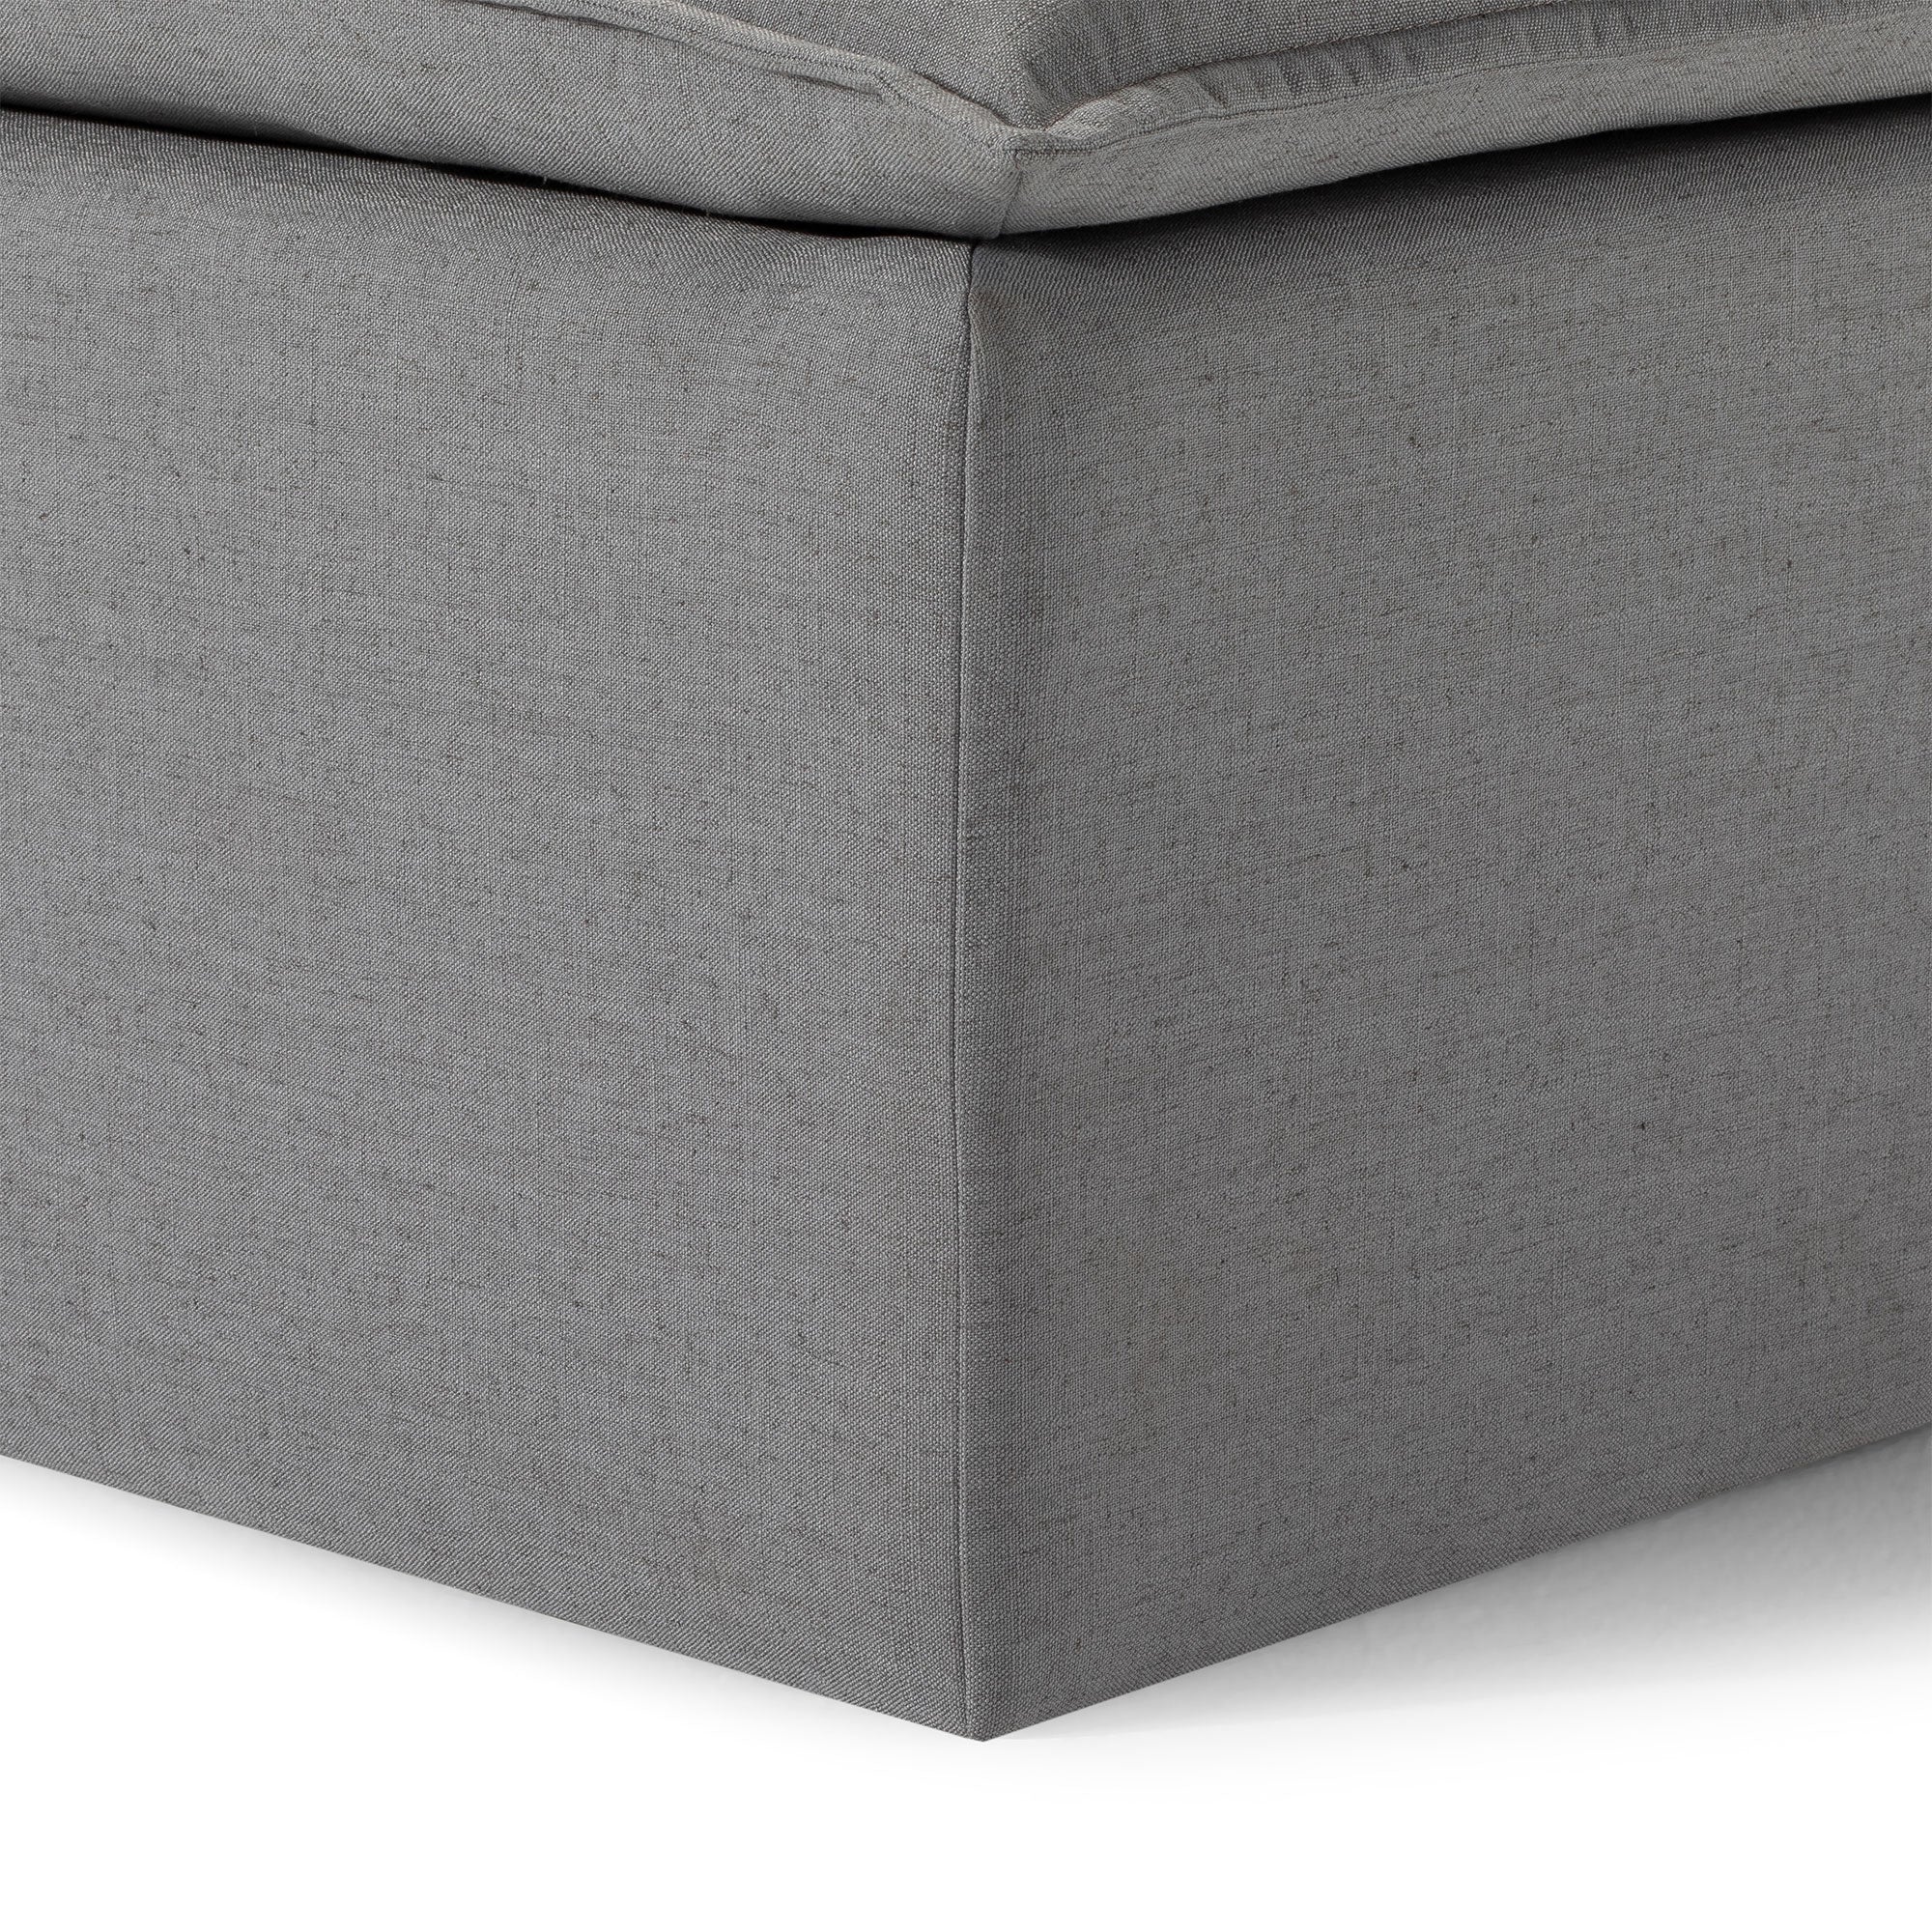 Claude Organic Ottoman in Slate Fabric Upholstery in Ottomans & Benches by Maven Lane